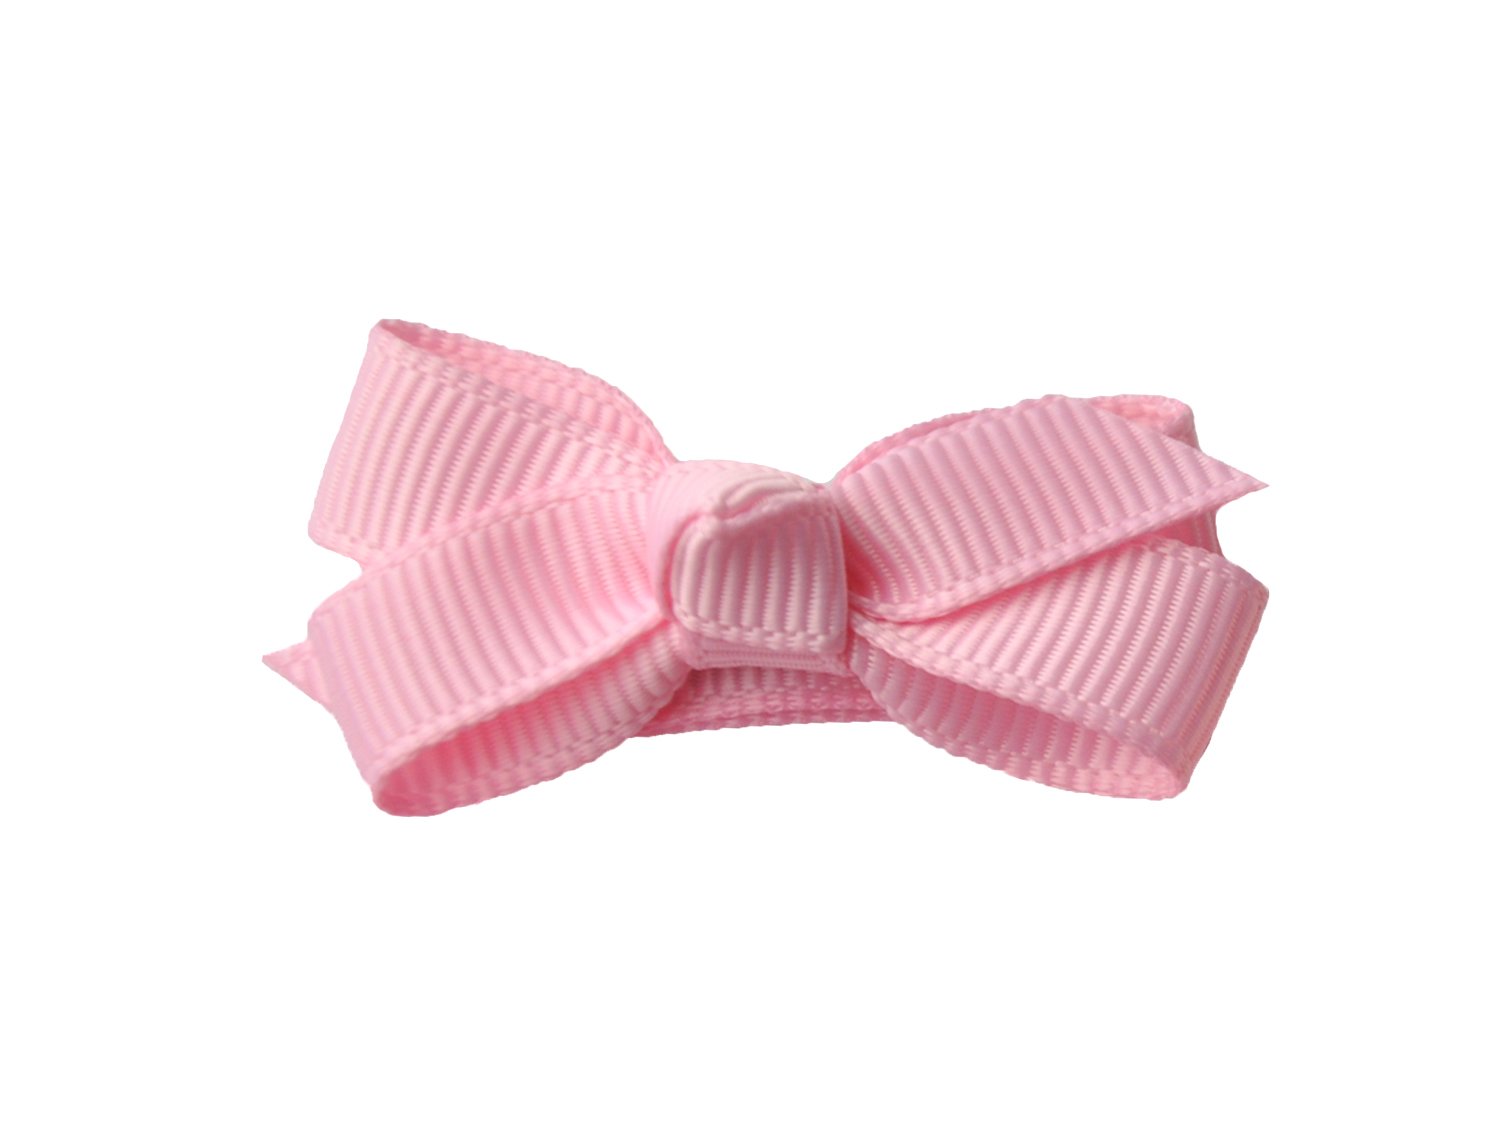 Small Snap Chelsea Boutique Bow - Single Hair Bow - Rose Petal Pink Baby Wisp